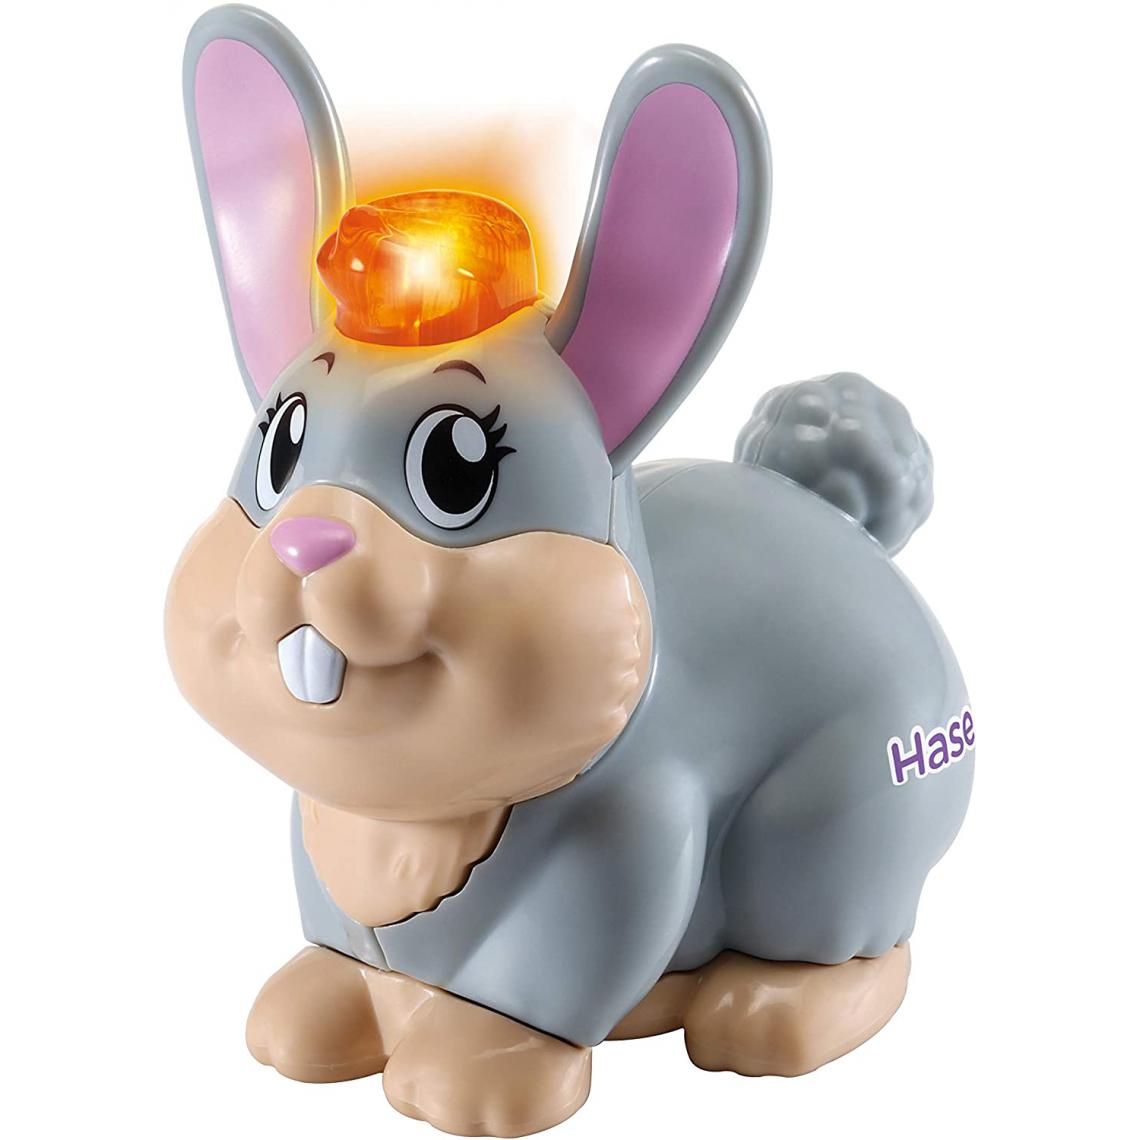 Vtech - peluche Tip Tap Baby Tiere-Hase Animal - Peluches interactives